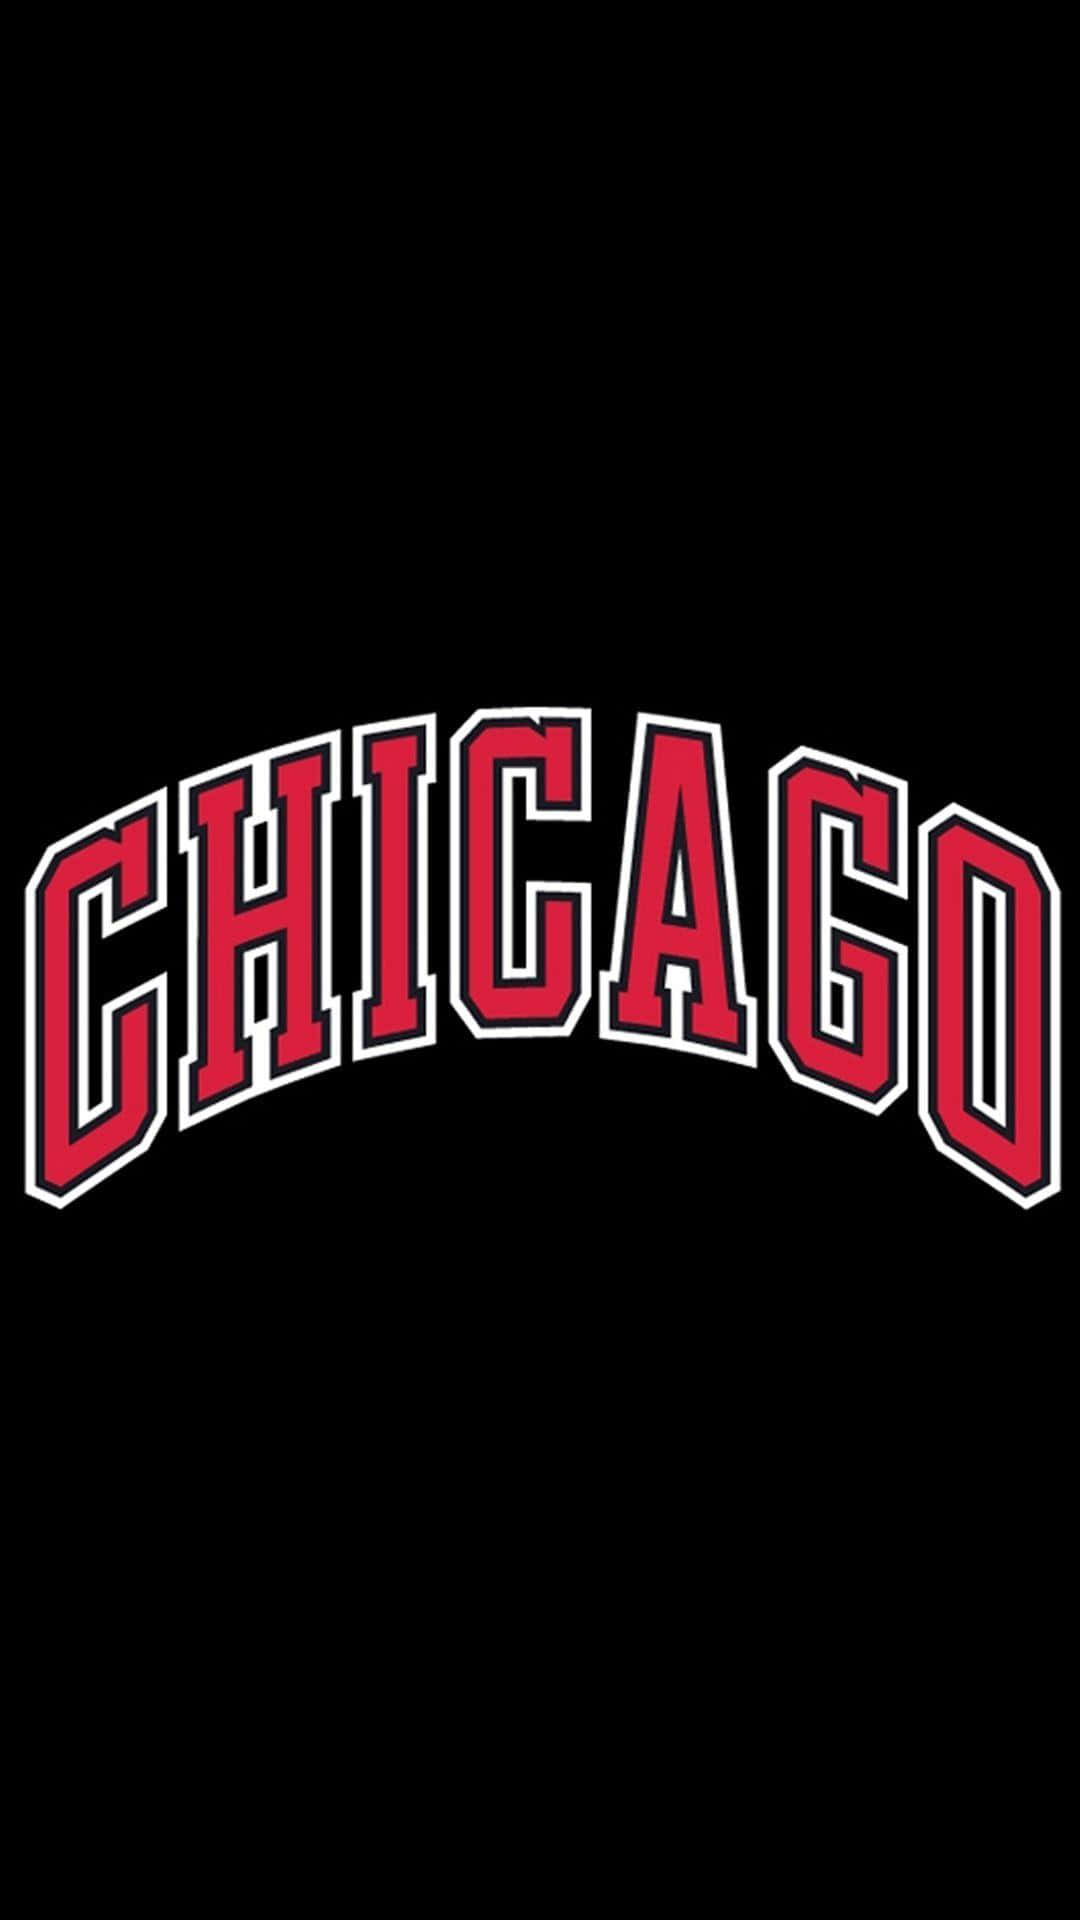 Show Your Chicago Bulls Pride With This Distinctive Iphone Background